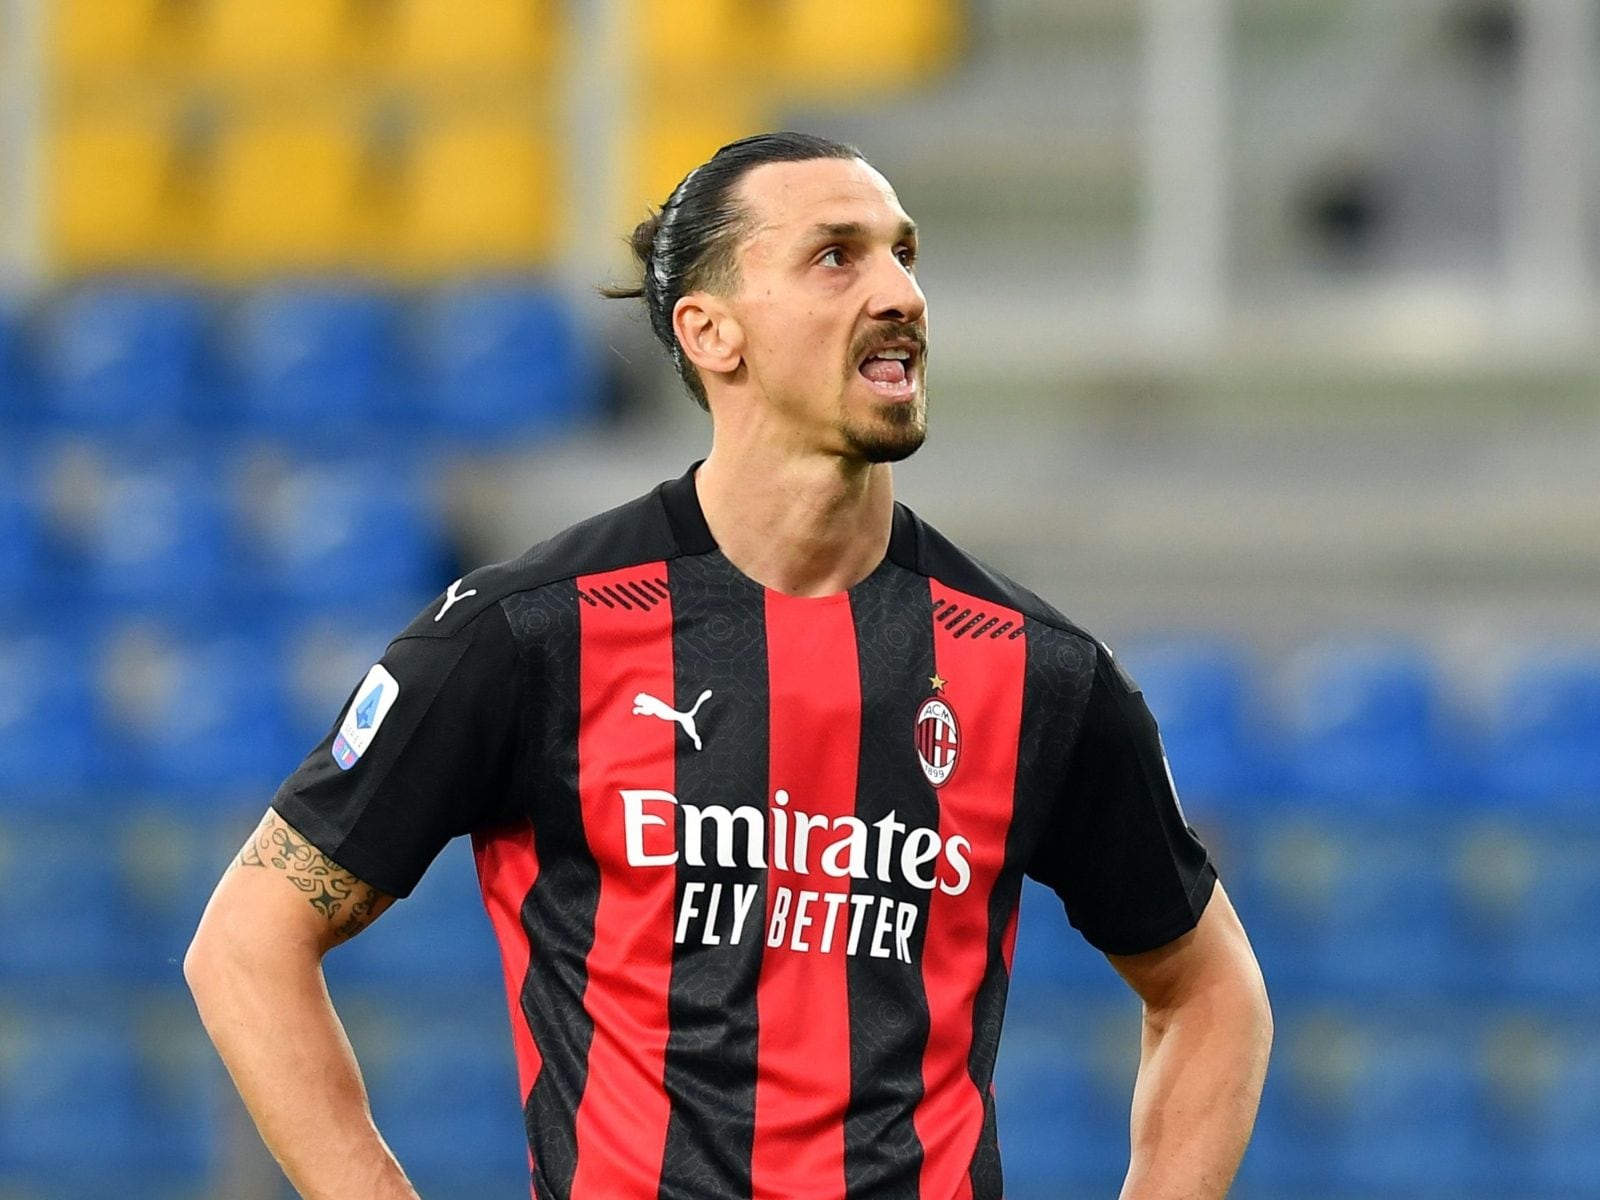 Sweden's Zlatan Ibrahimovic Returns as Swedes Seek to Book World Cup Berth